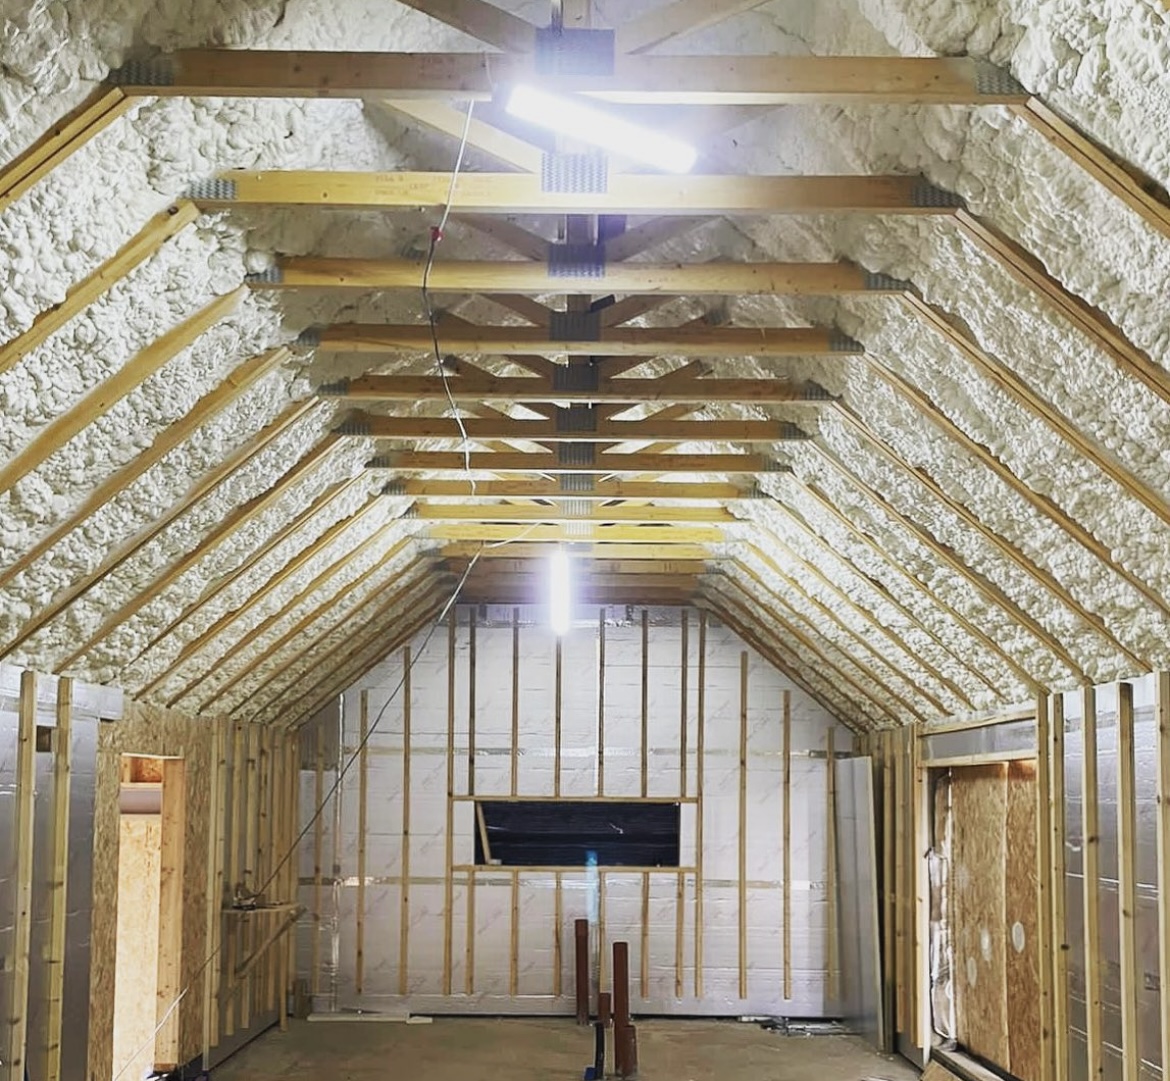 An image showing a room with wooden beams and insulation installed in the roof. Wooden stud walls on each side of the room.